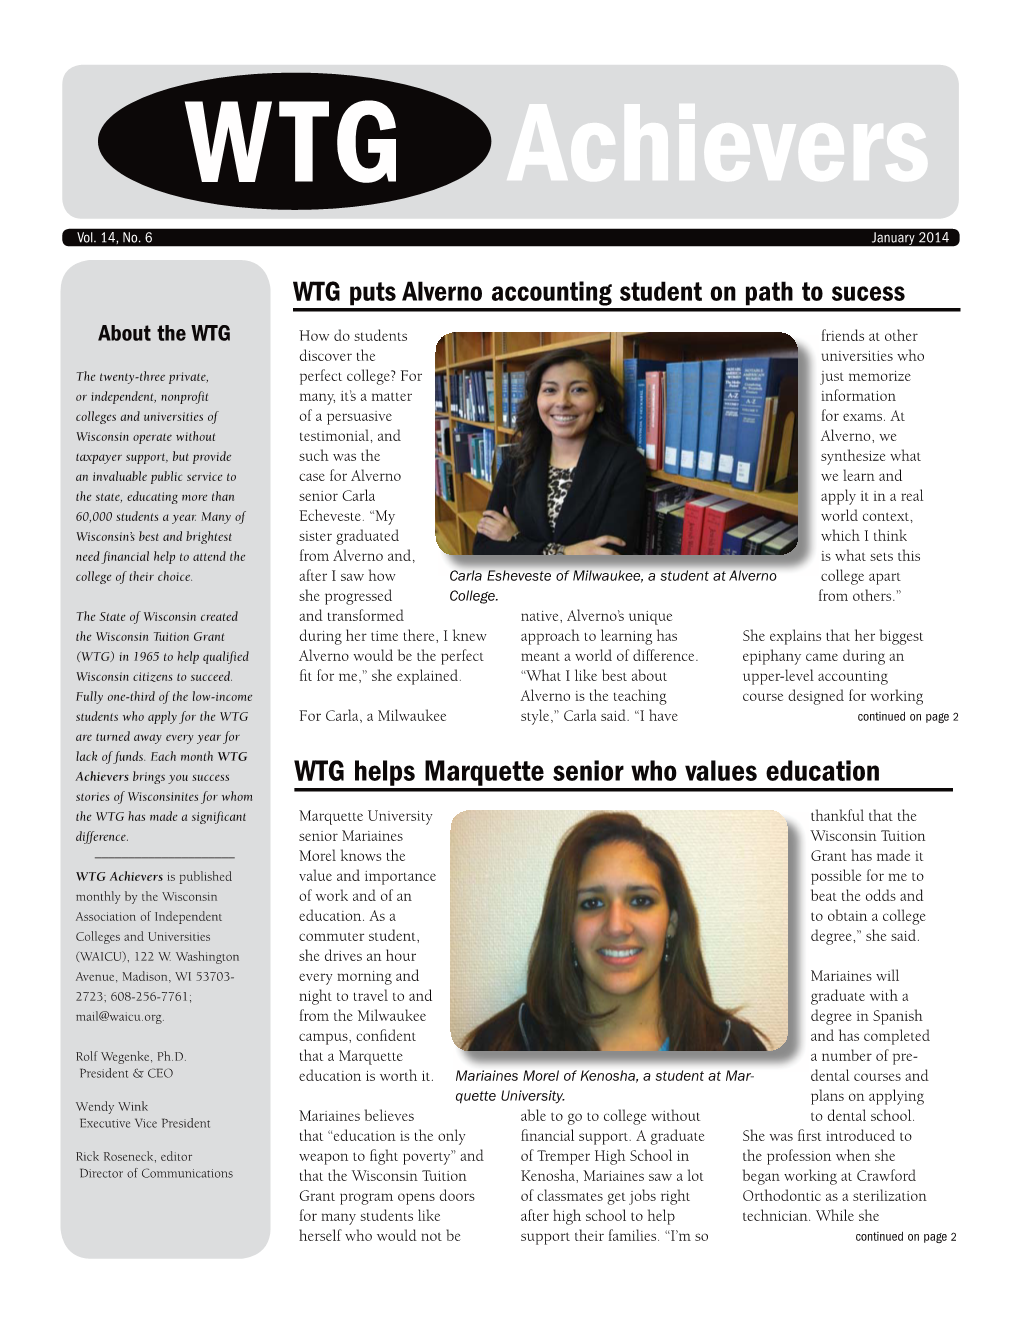 WTG Helps Marquette Senior Who Values Education Stories of Wisconsinites for Whom the WTG Has Made a Significant Marquette University Thankful That the Difference